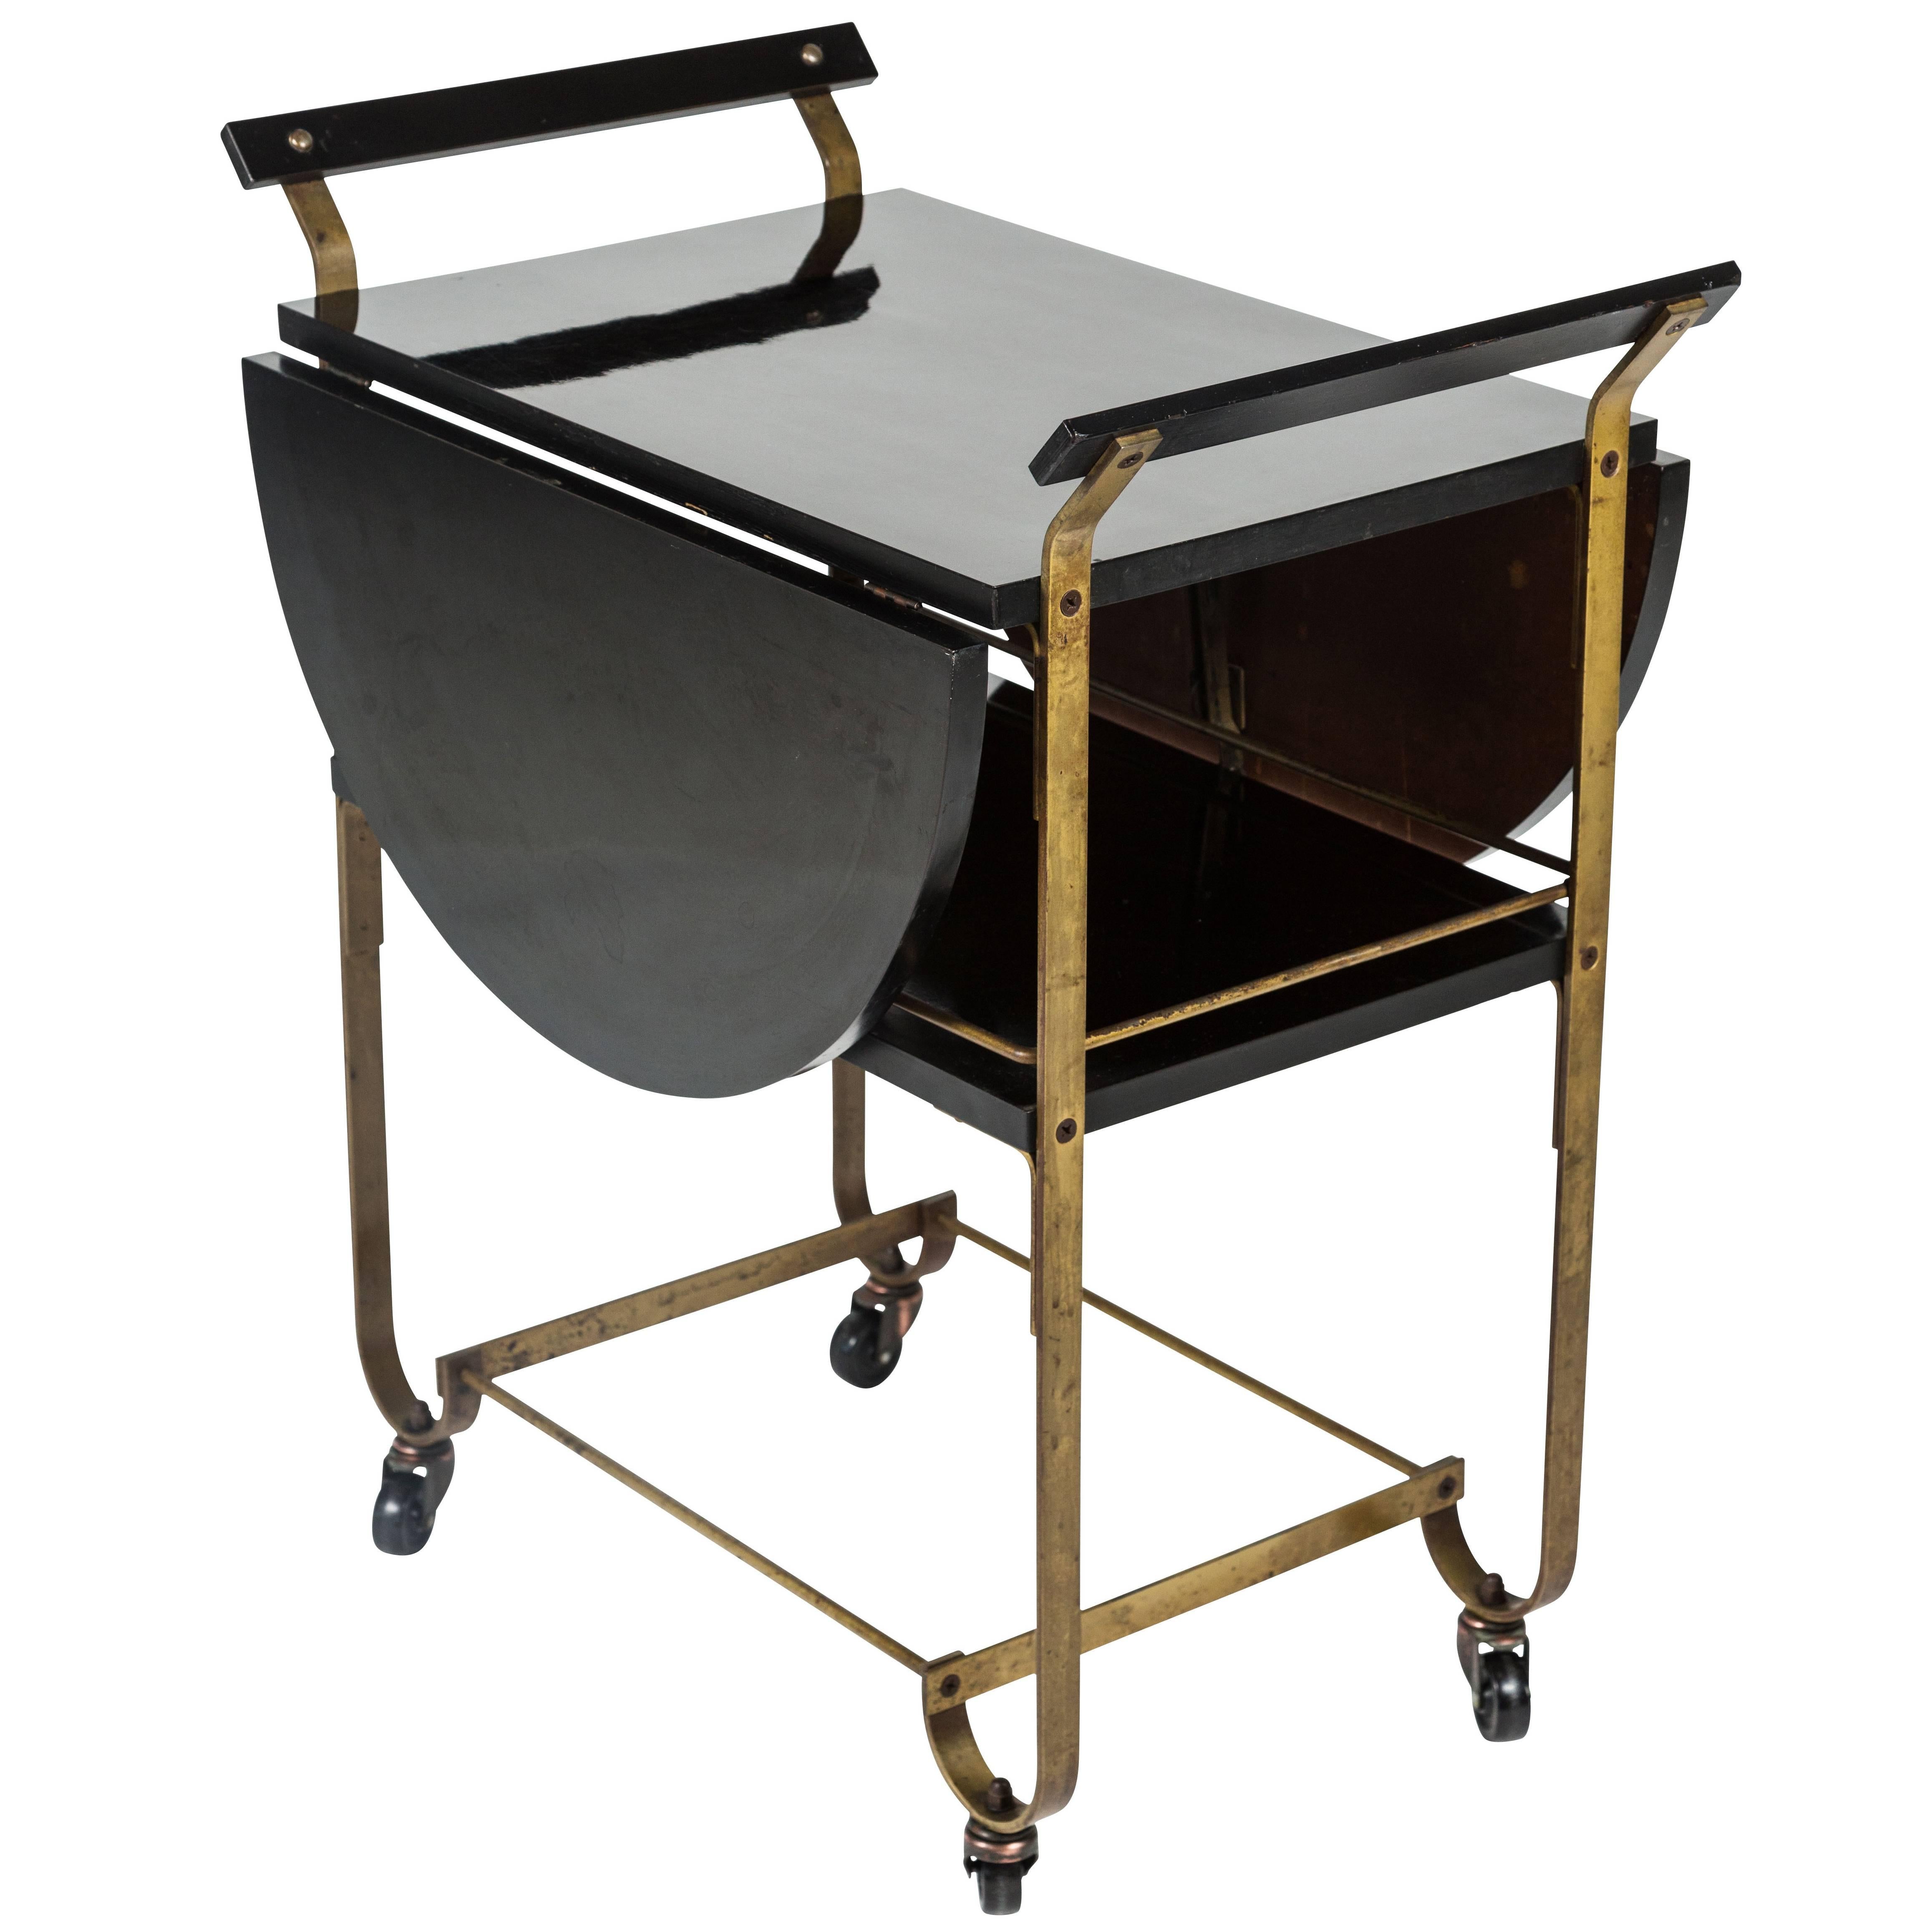 Stylish Art Deco Black and Gold Drinks Trolley